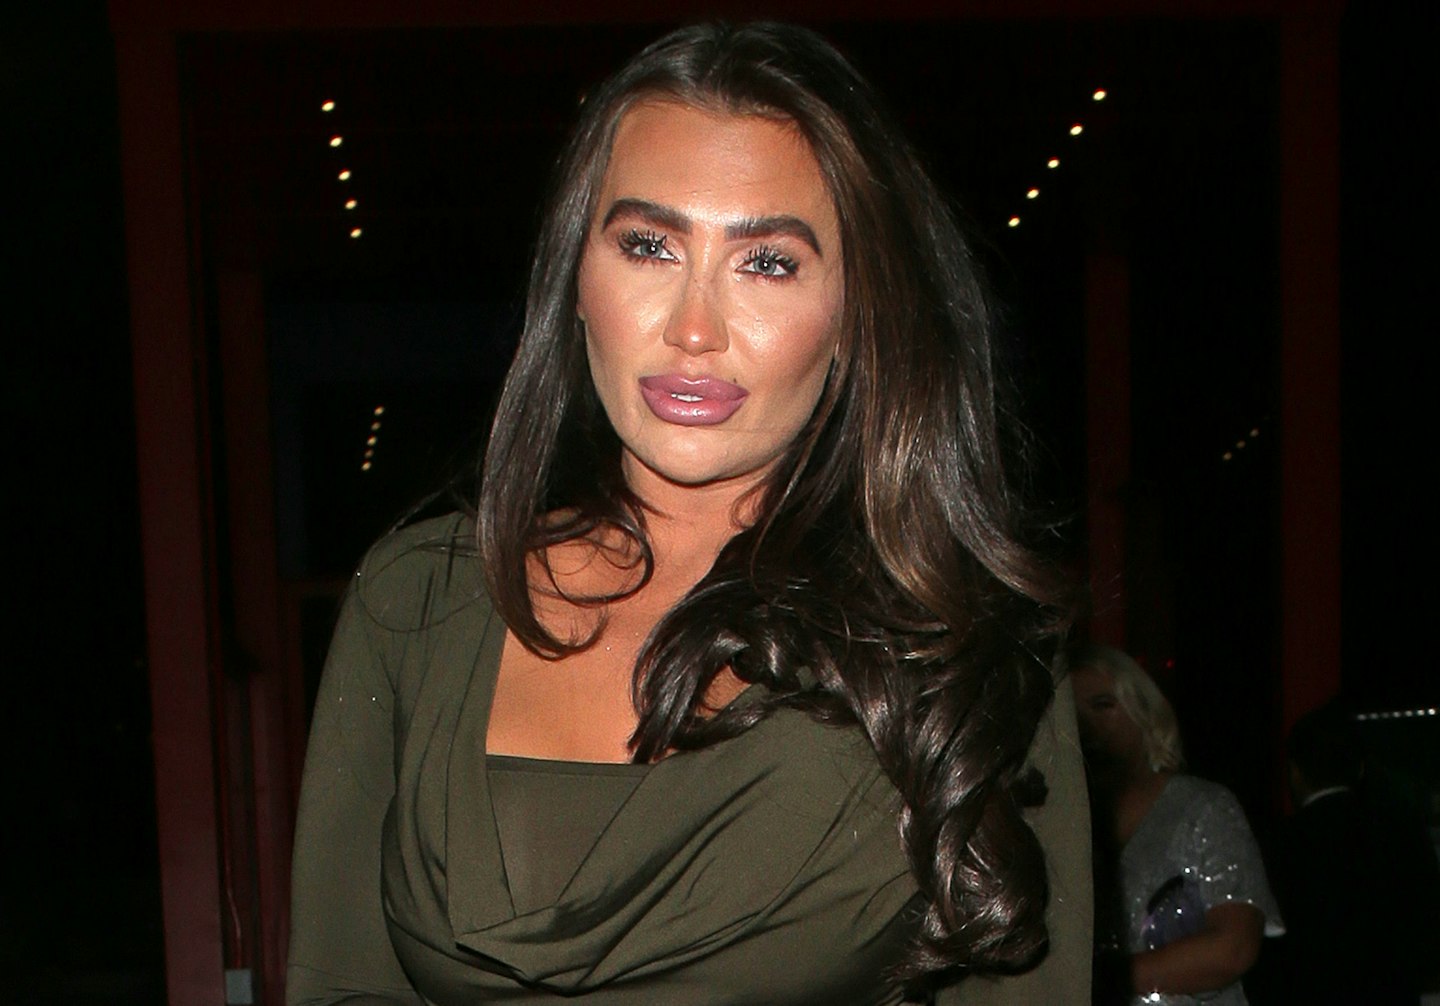 Love Island’s Tommy Fury exchanged flirty messages with Lauren Goodger ...